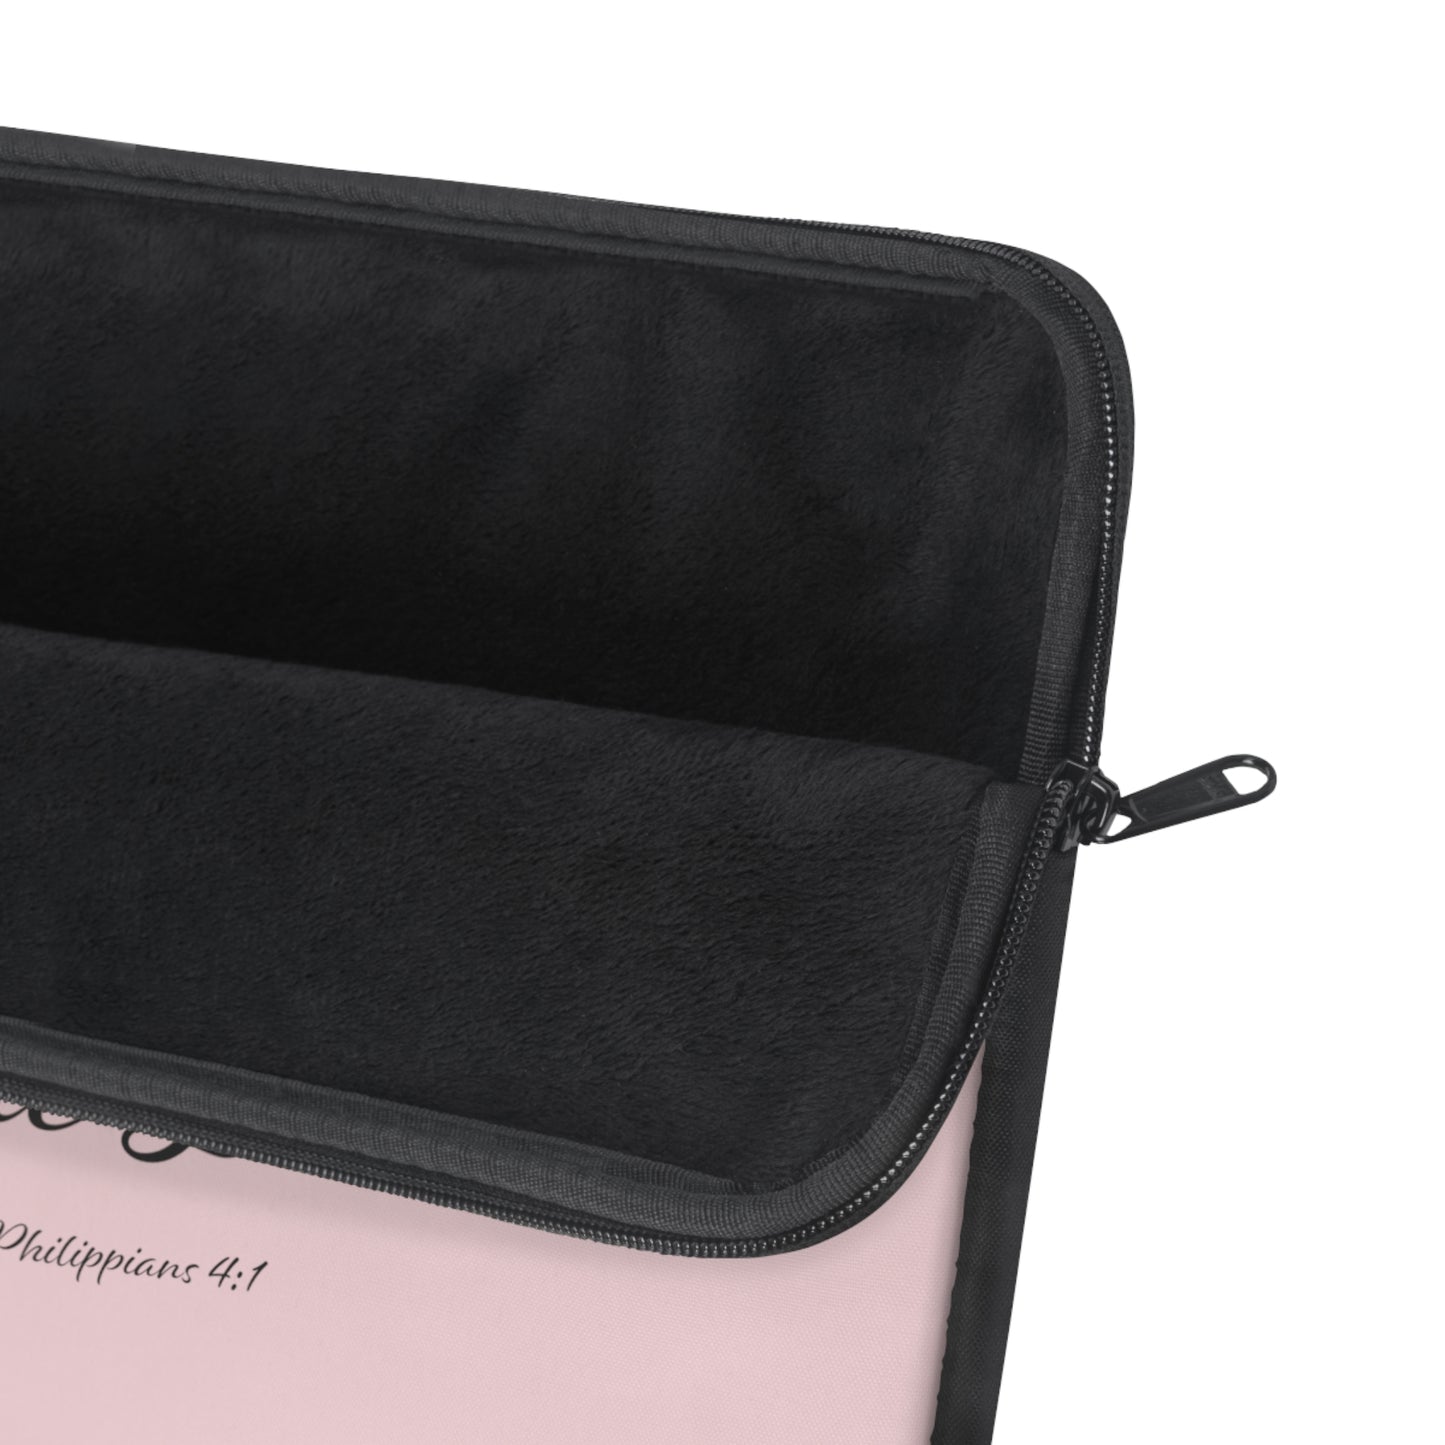 Laptop Sleeve - Stand Firm in the Lord - pink